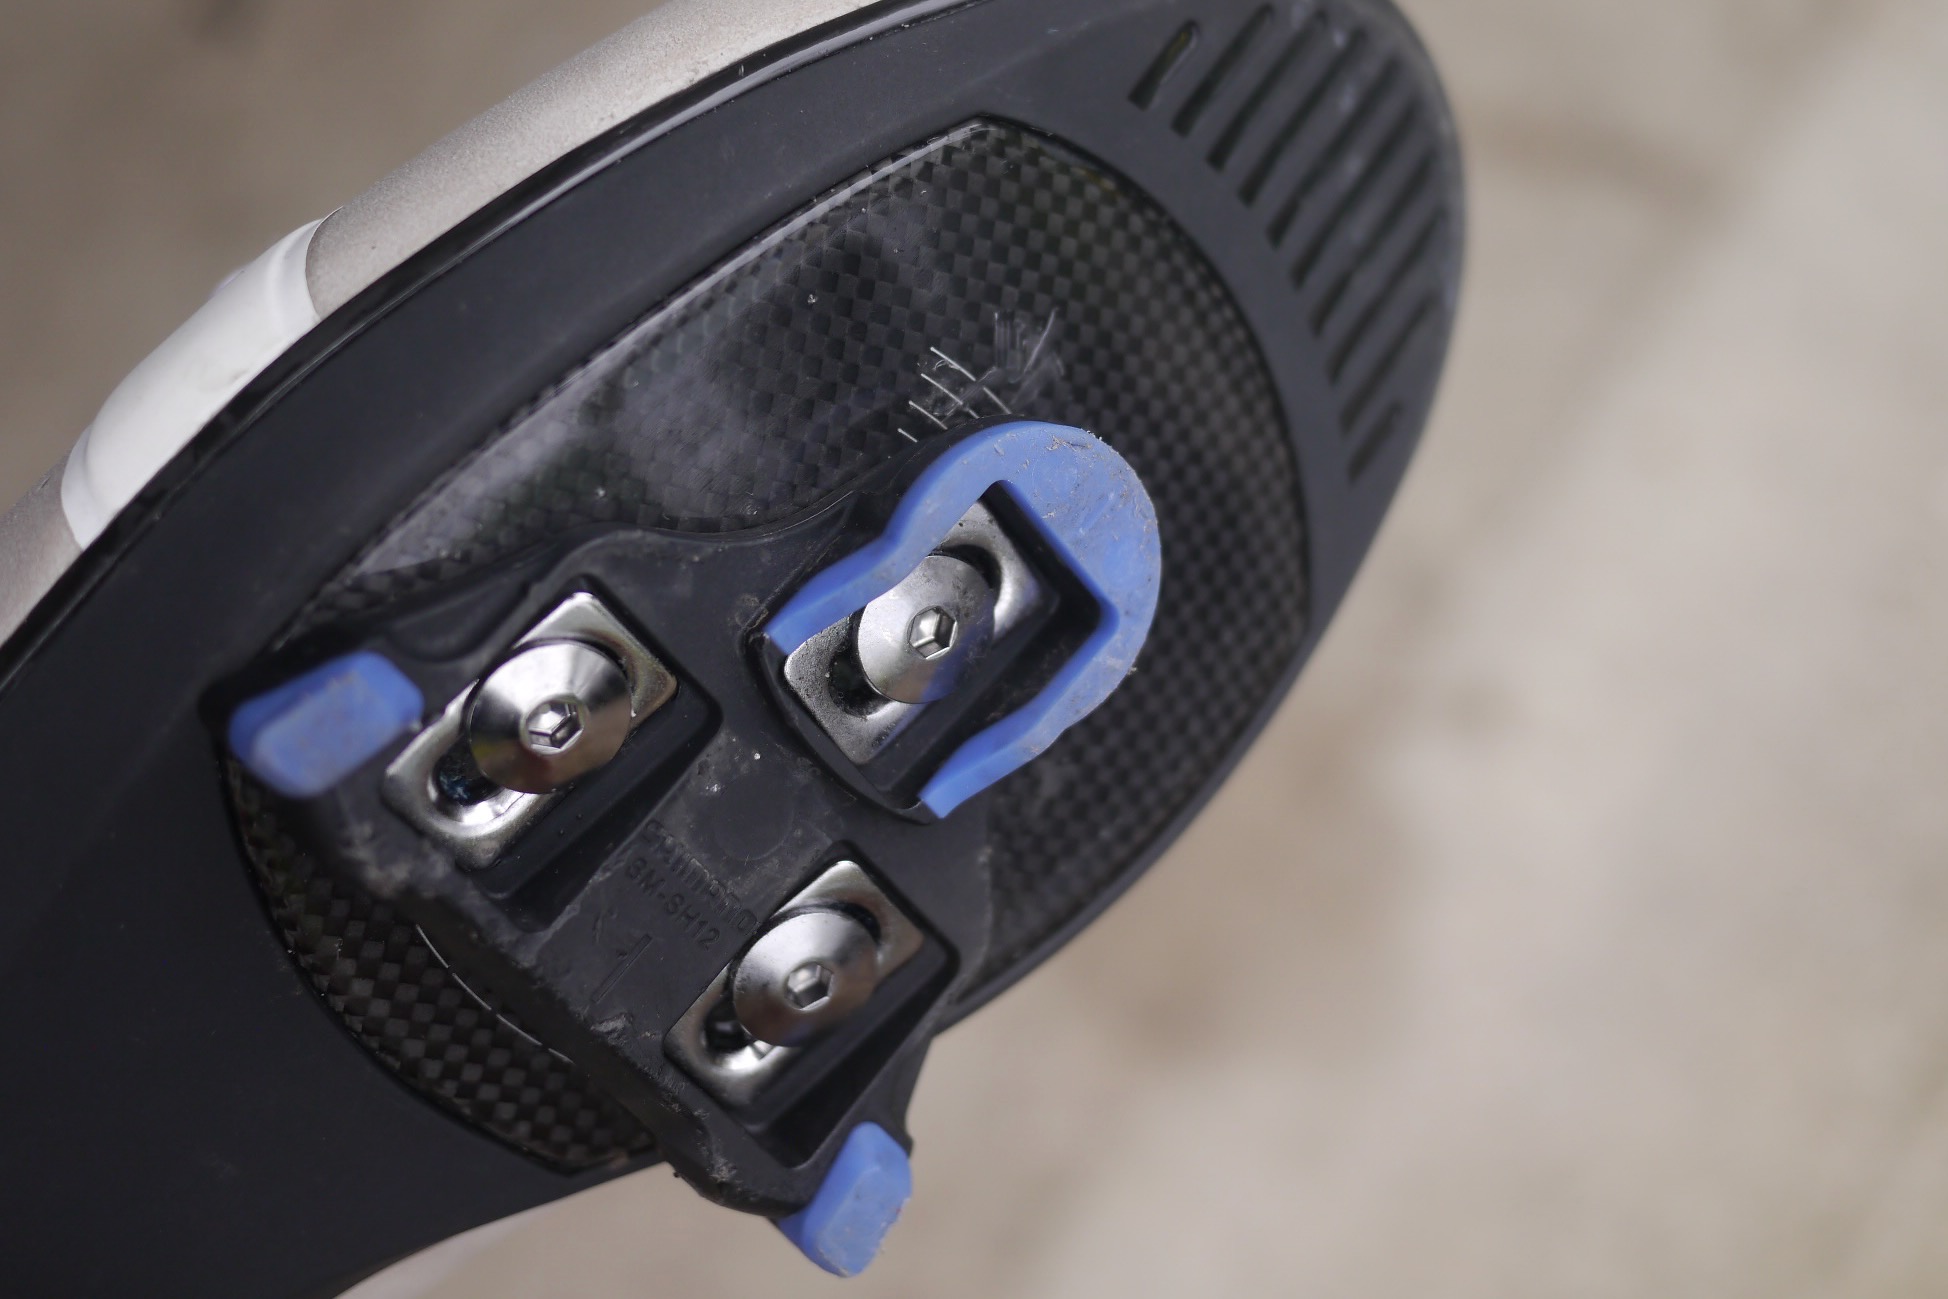 A shimano cleat mounted to the sole of a road bike shoe